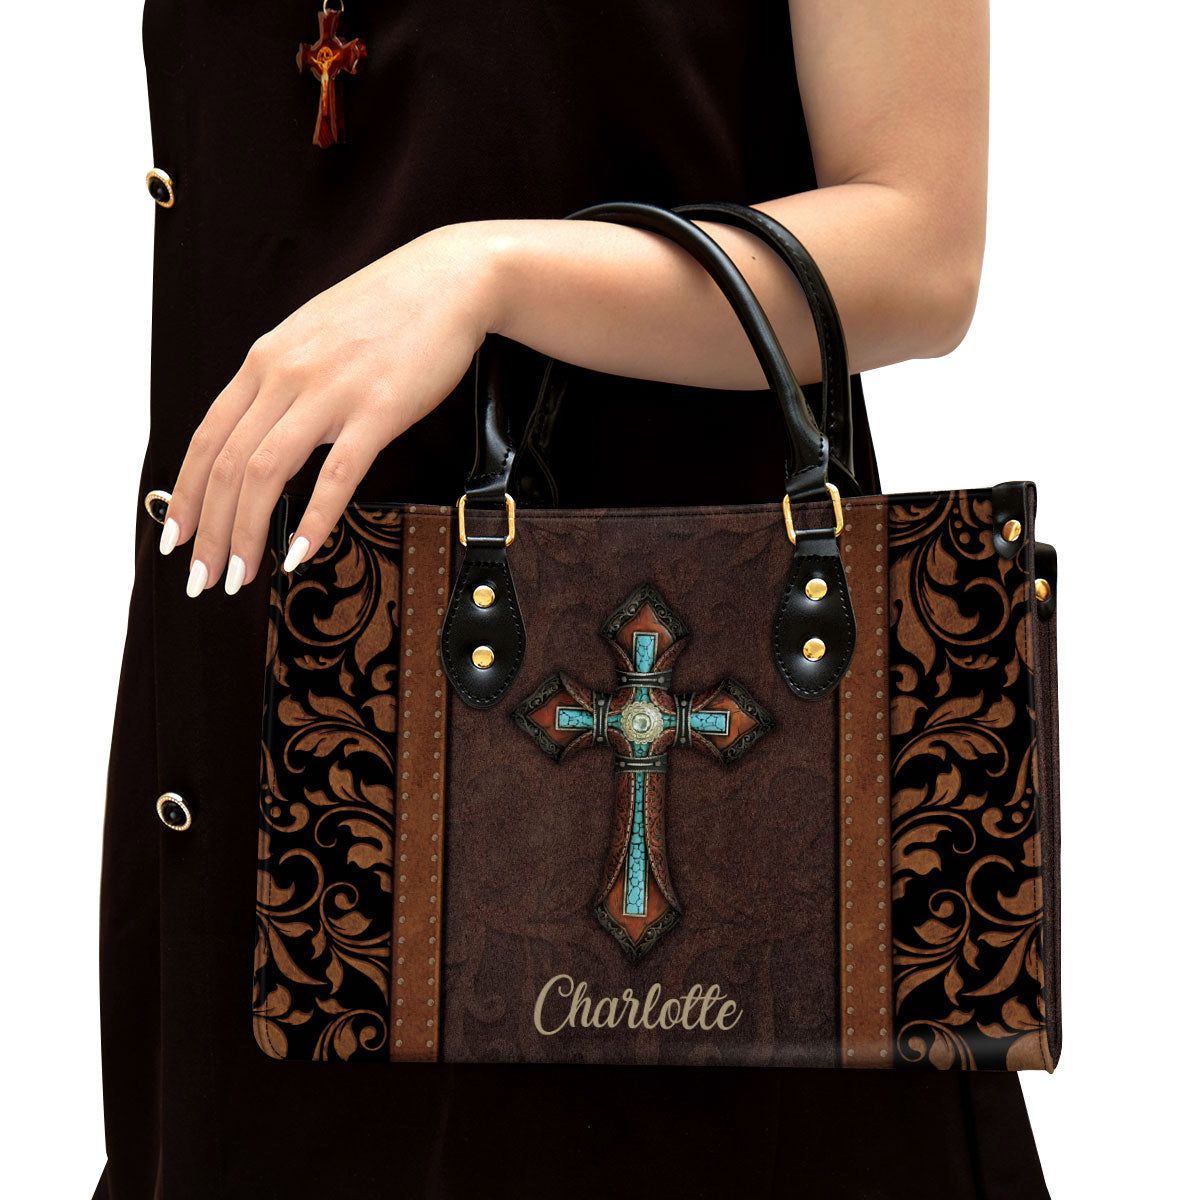 Unique Personalized Cross Leather Handbag With Handle Christ Gifts For Religious Women